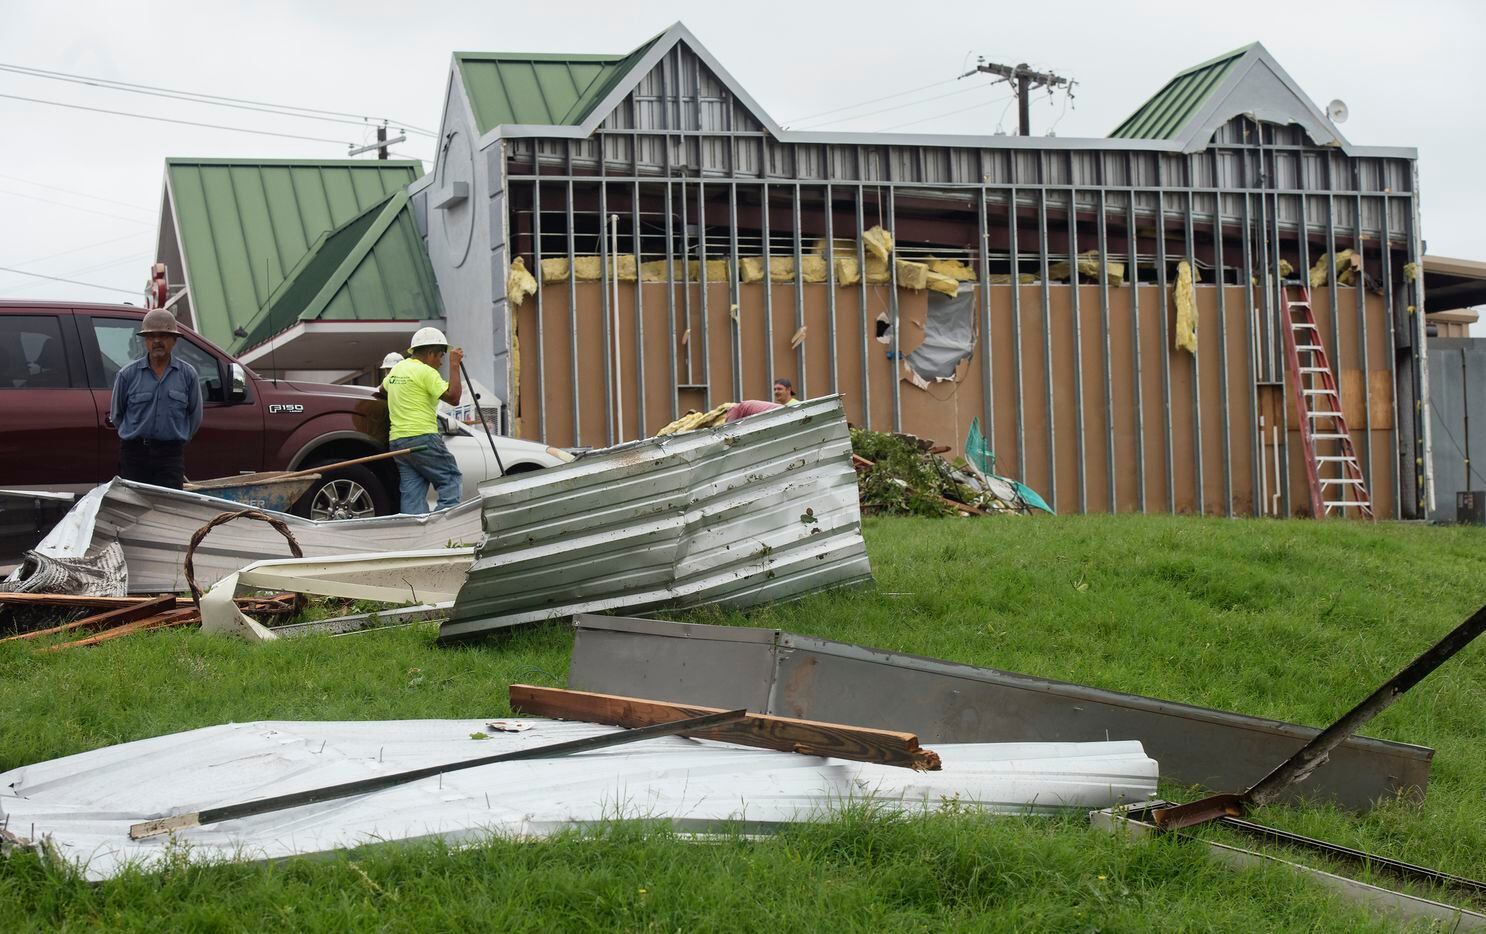 Damage to the Valero gas station at the intersection of Highway 64 and Trade Days Blvd. in Canton, Texas is seen on Thursday, May 30, 2019, the day after several tornadoes came through Van Zandt County and Canton. 